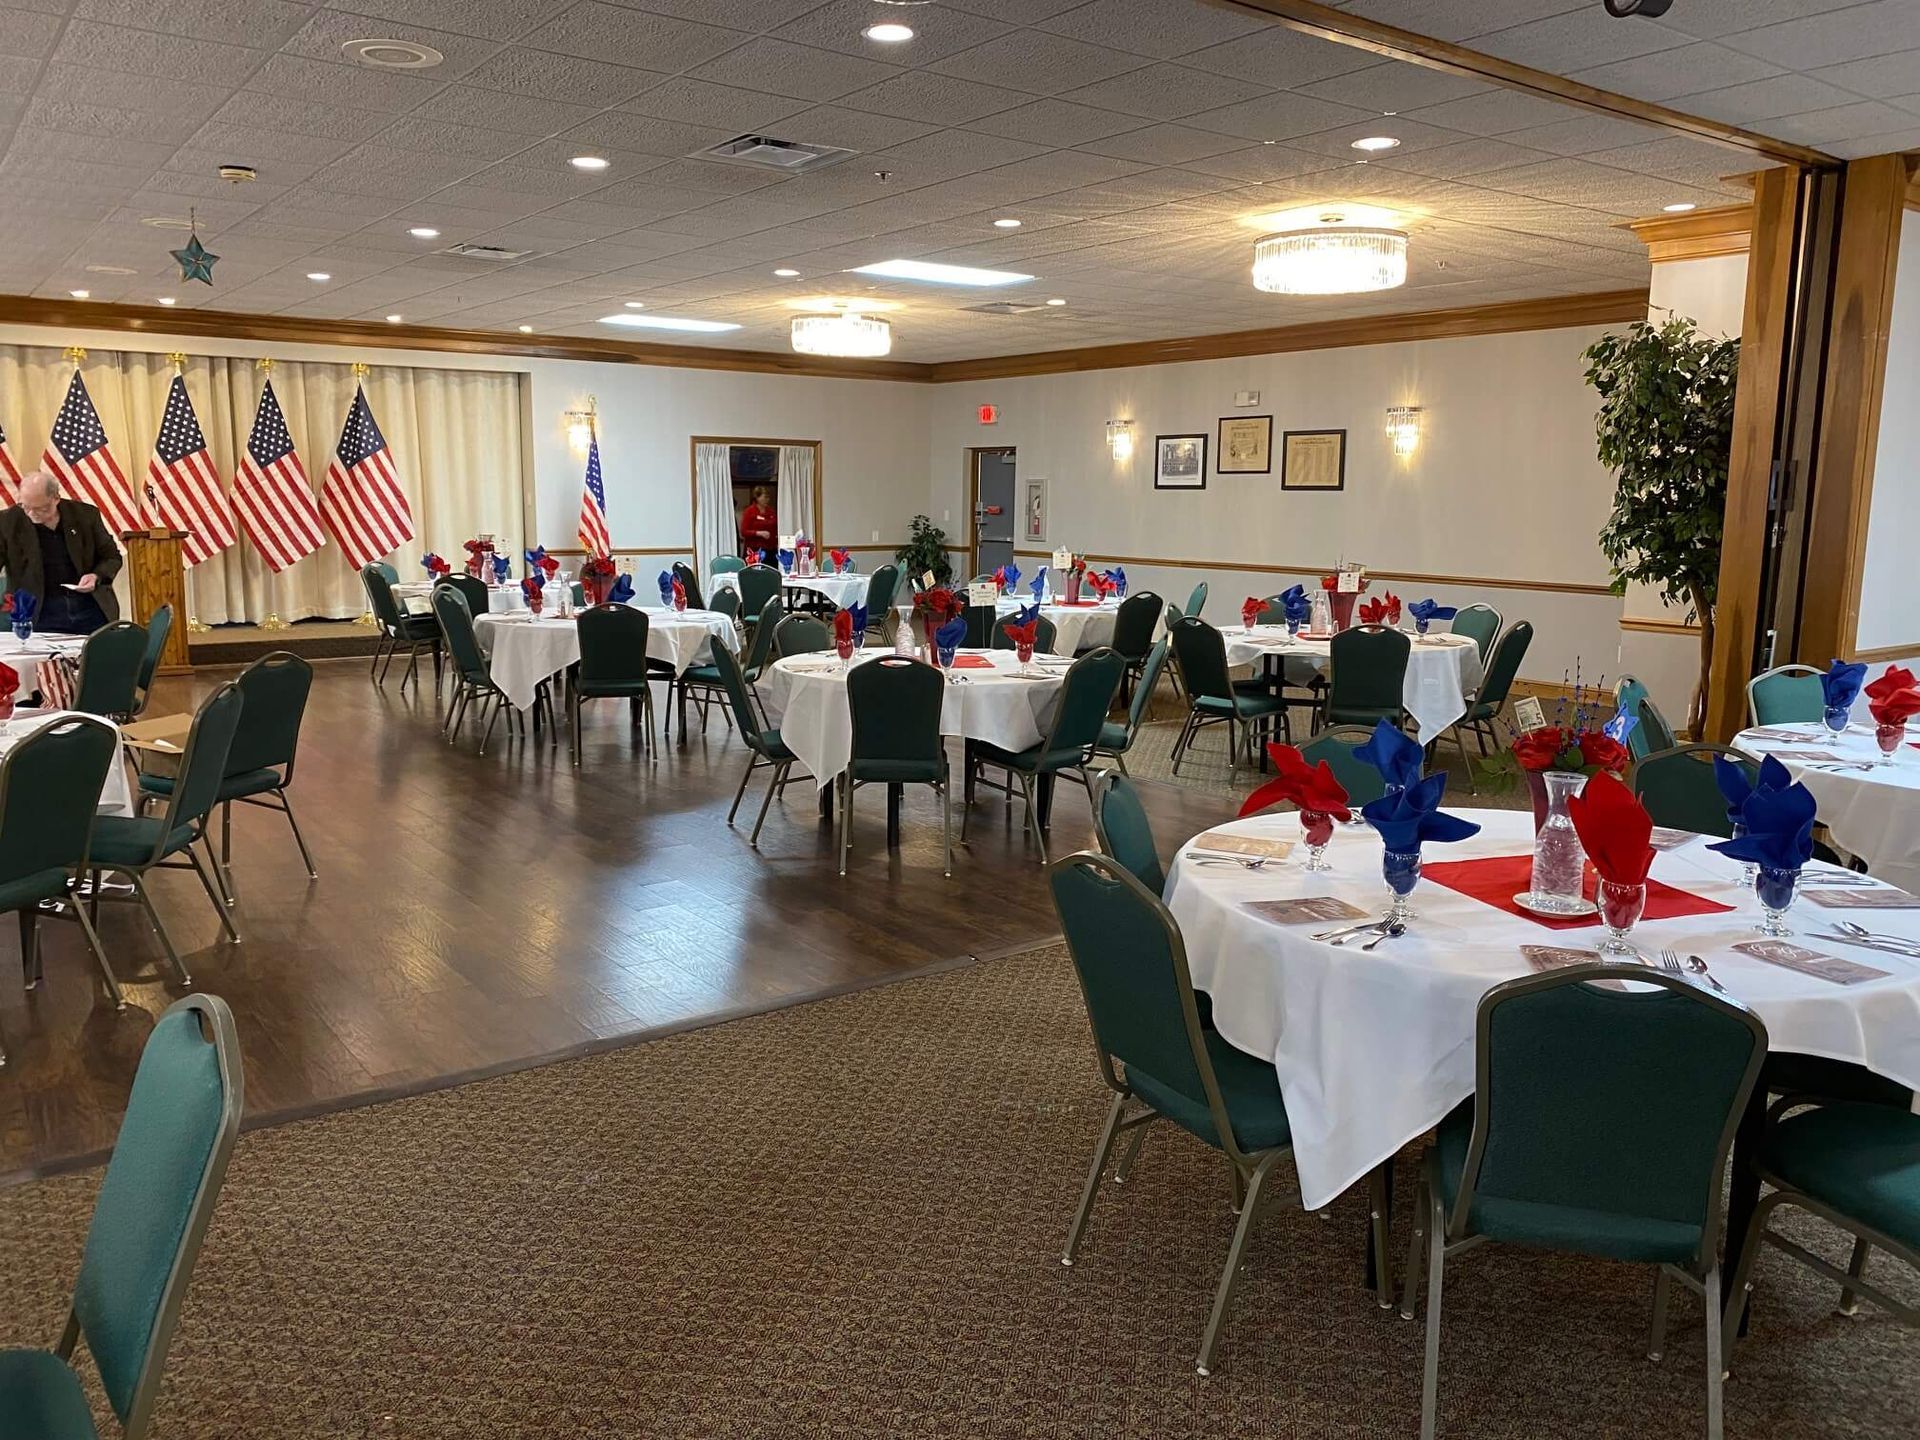 Elks Ballroom Tables and Dancefloor, red, white, and blue decor